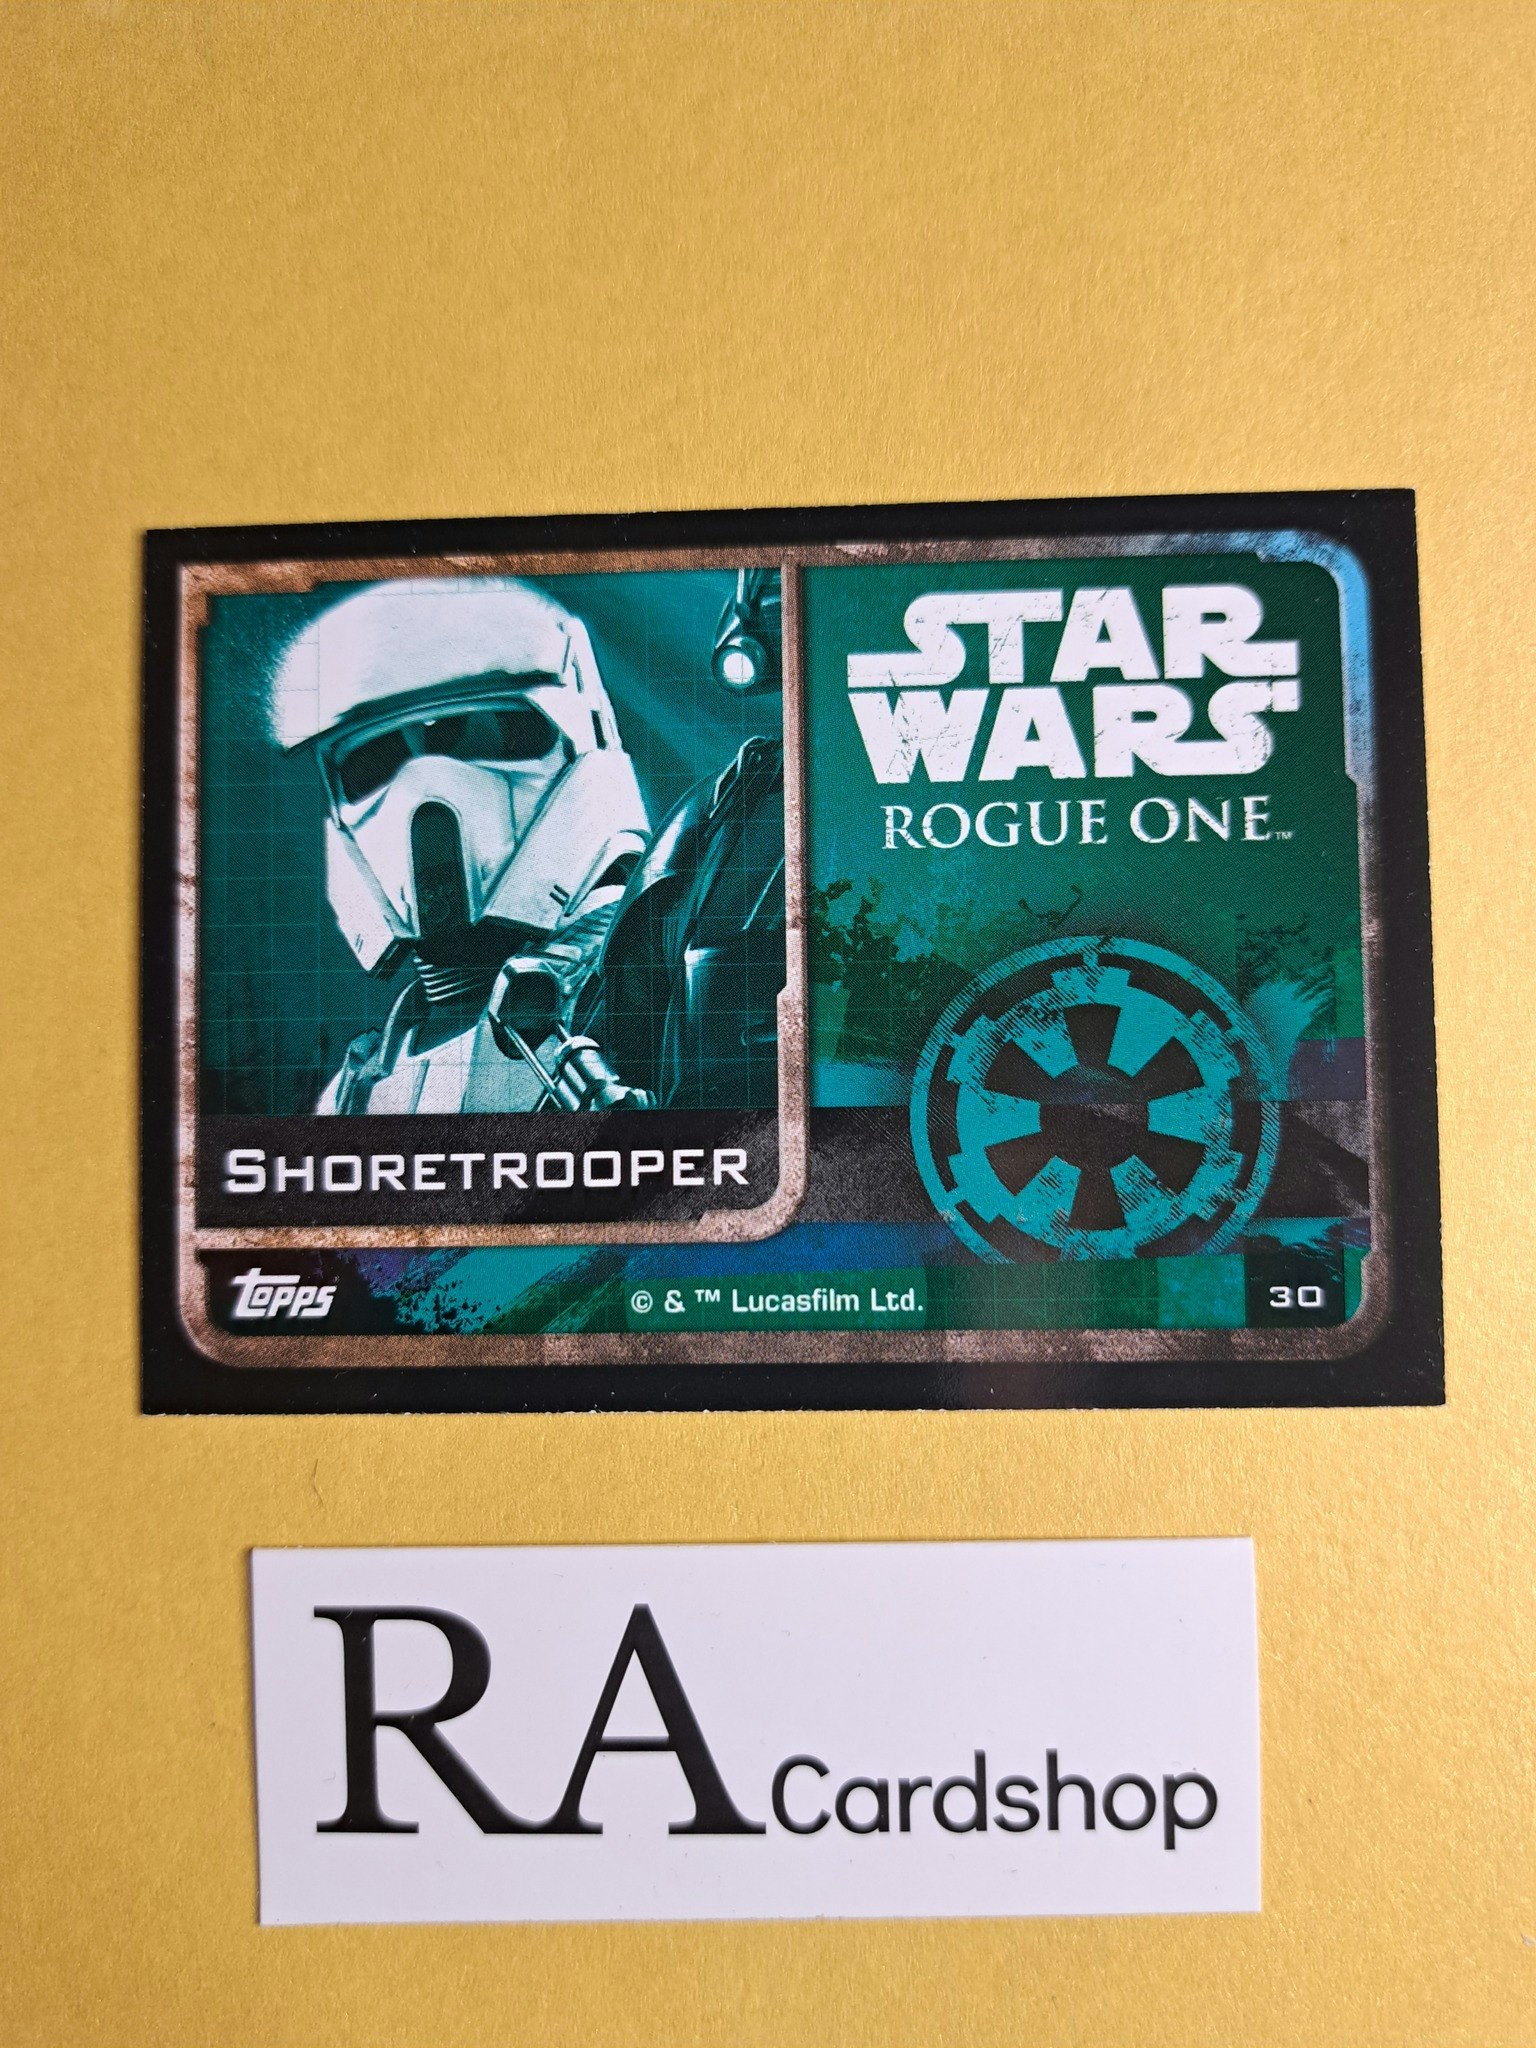 Shoretrooper #30 Rogue One Topps Star Wars